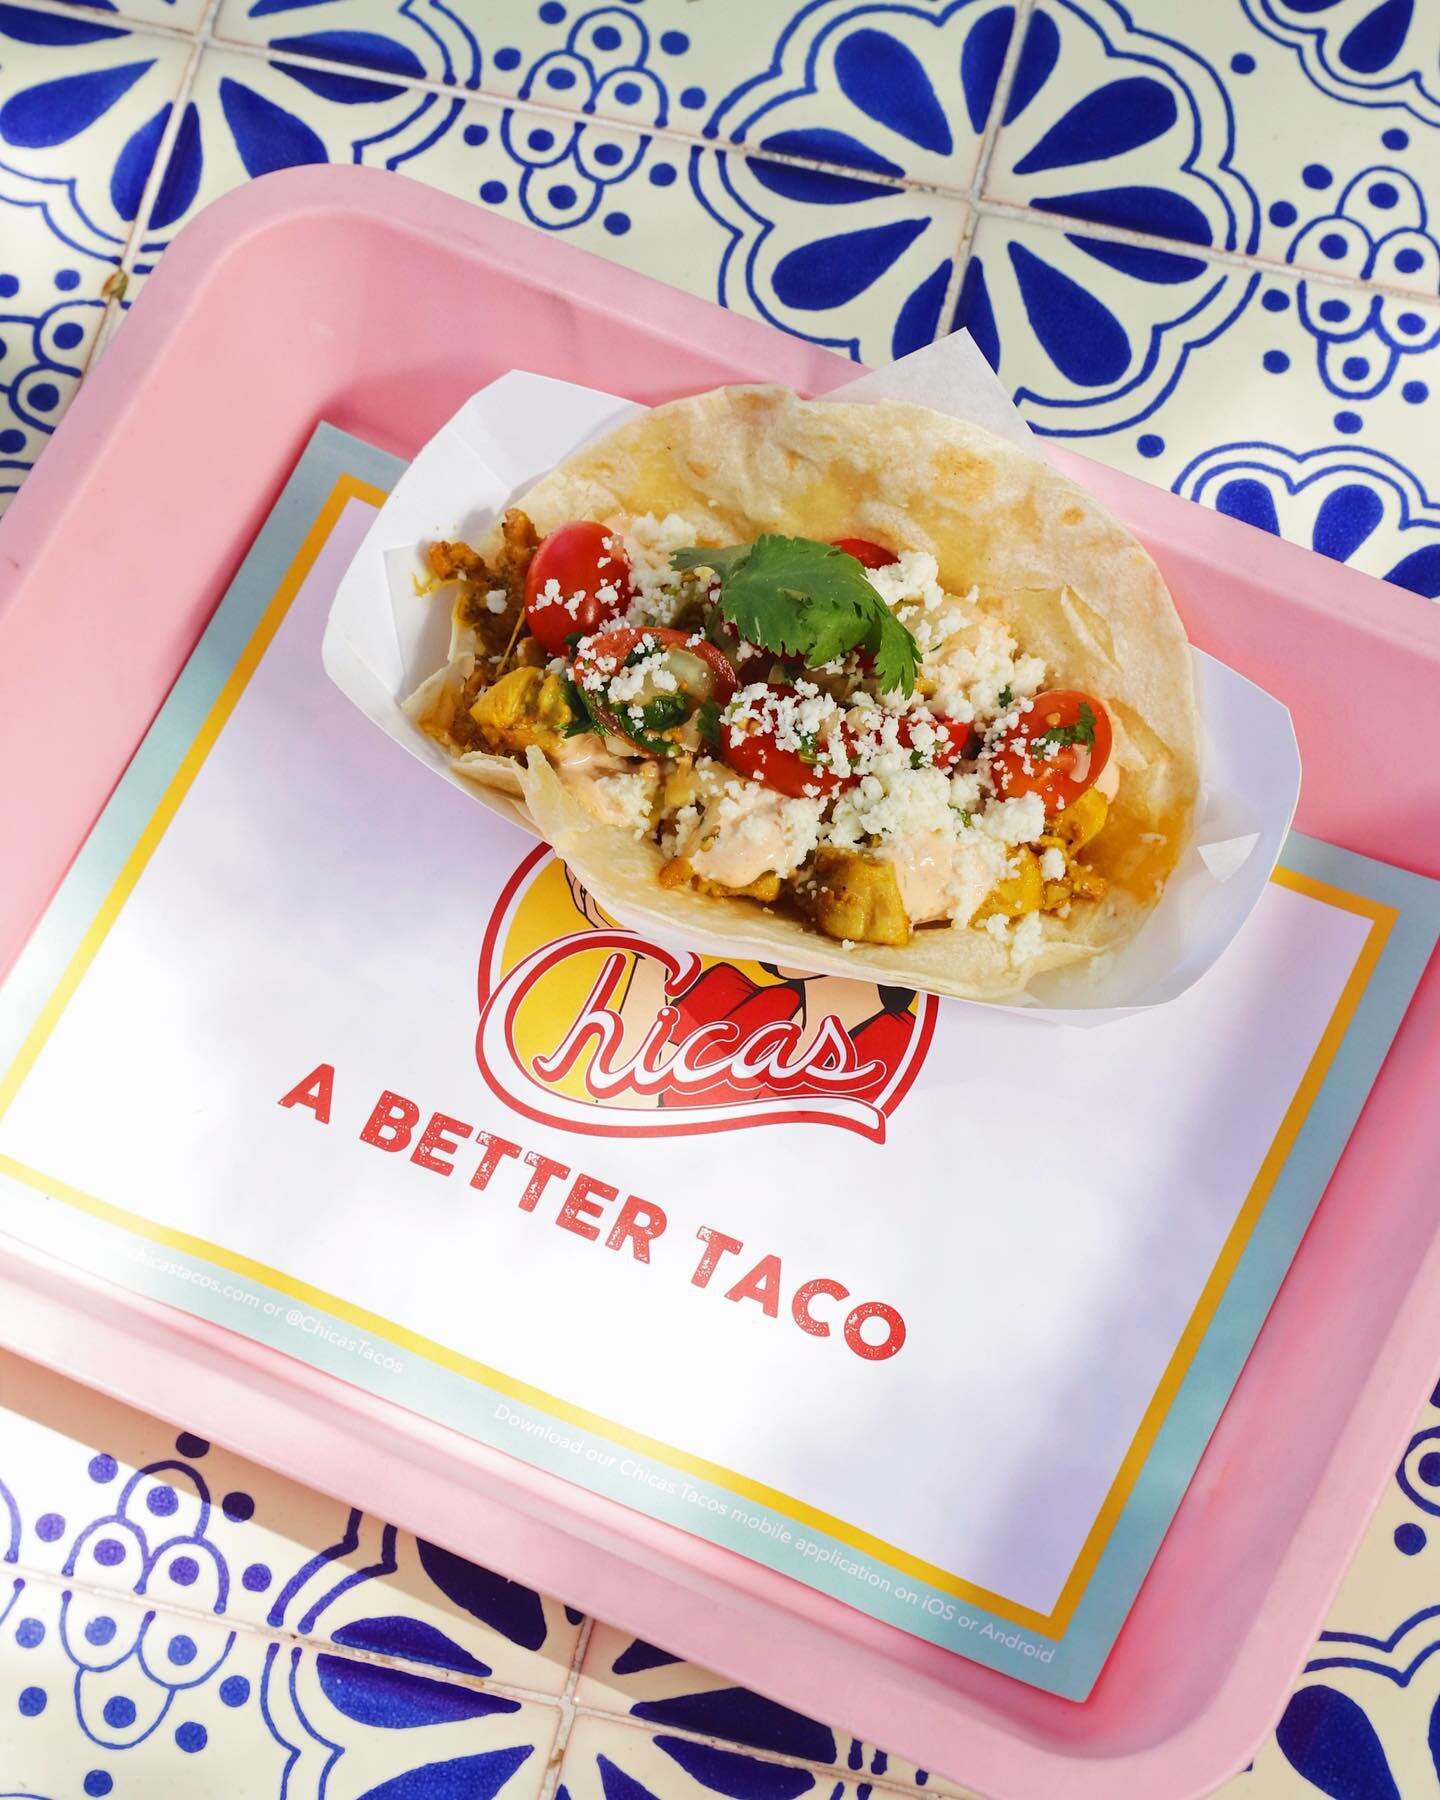 Mejorado is now proudly served at the delicious @chicastacos
Available at all Chicas Tacos locations
Culver City
Beverly Grove
Miracle Mile
Venice